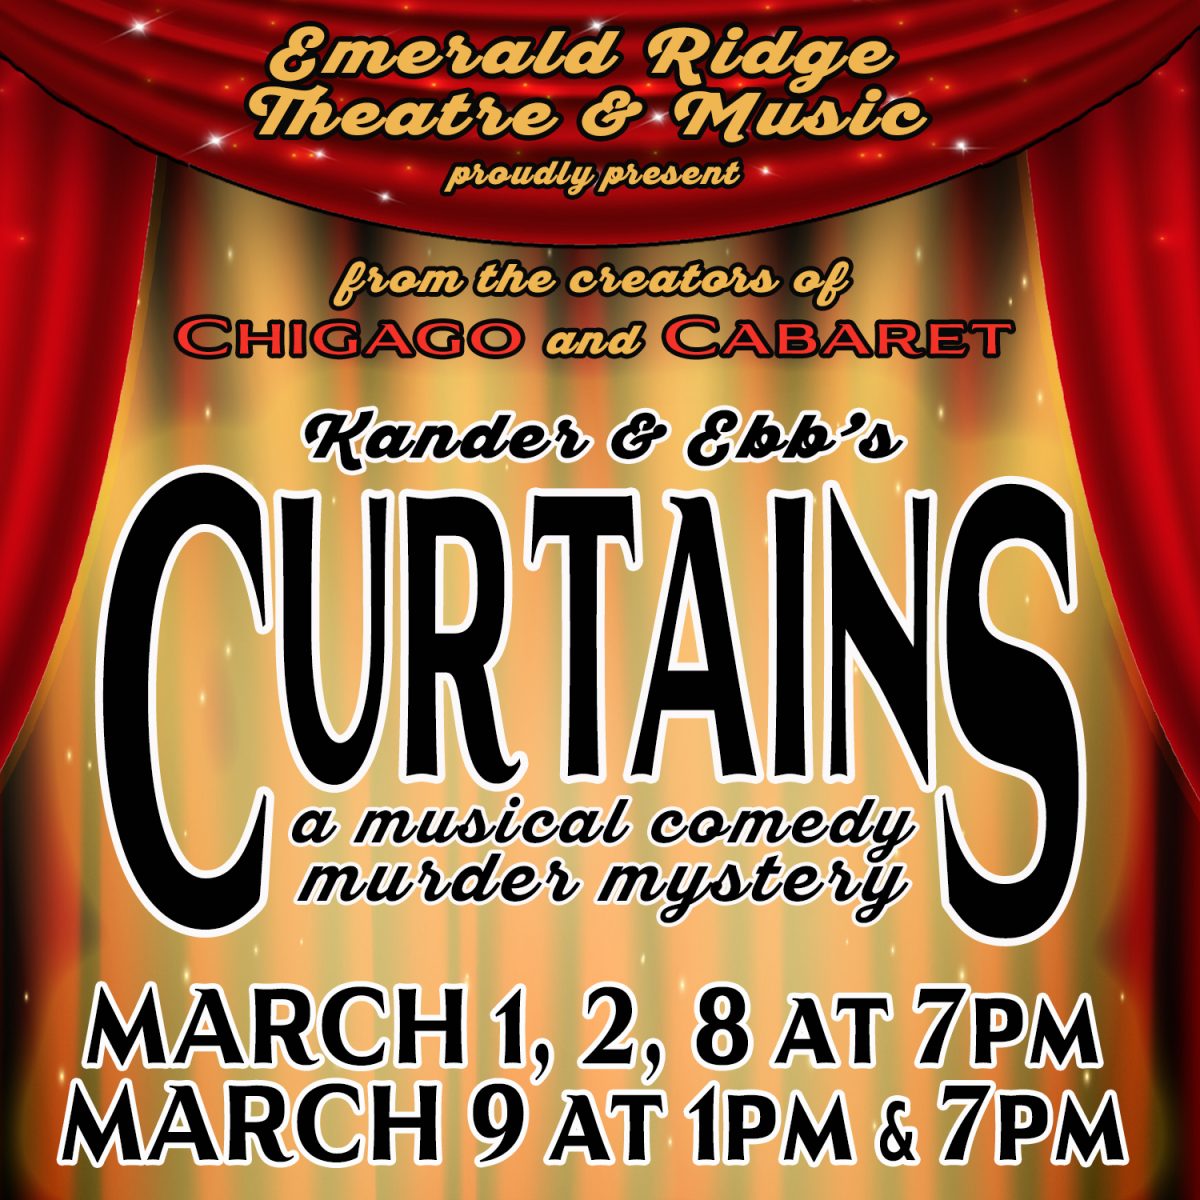 Cast list for Curtains released